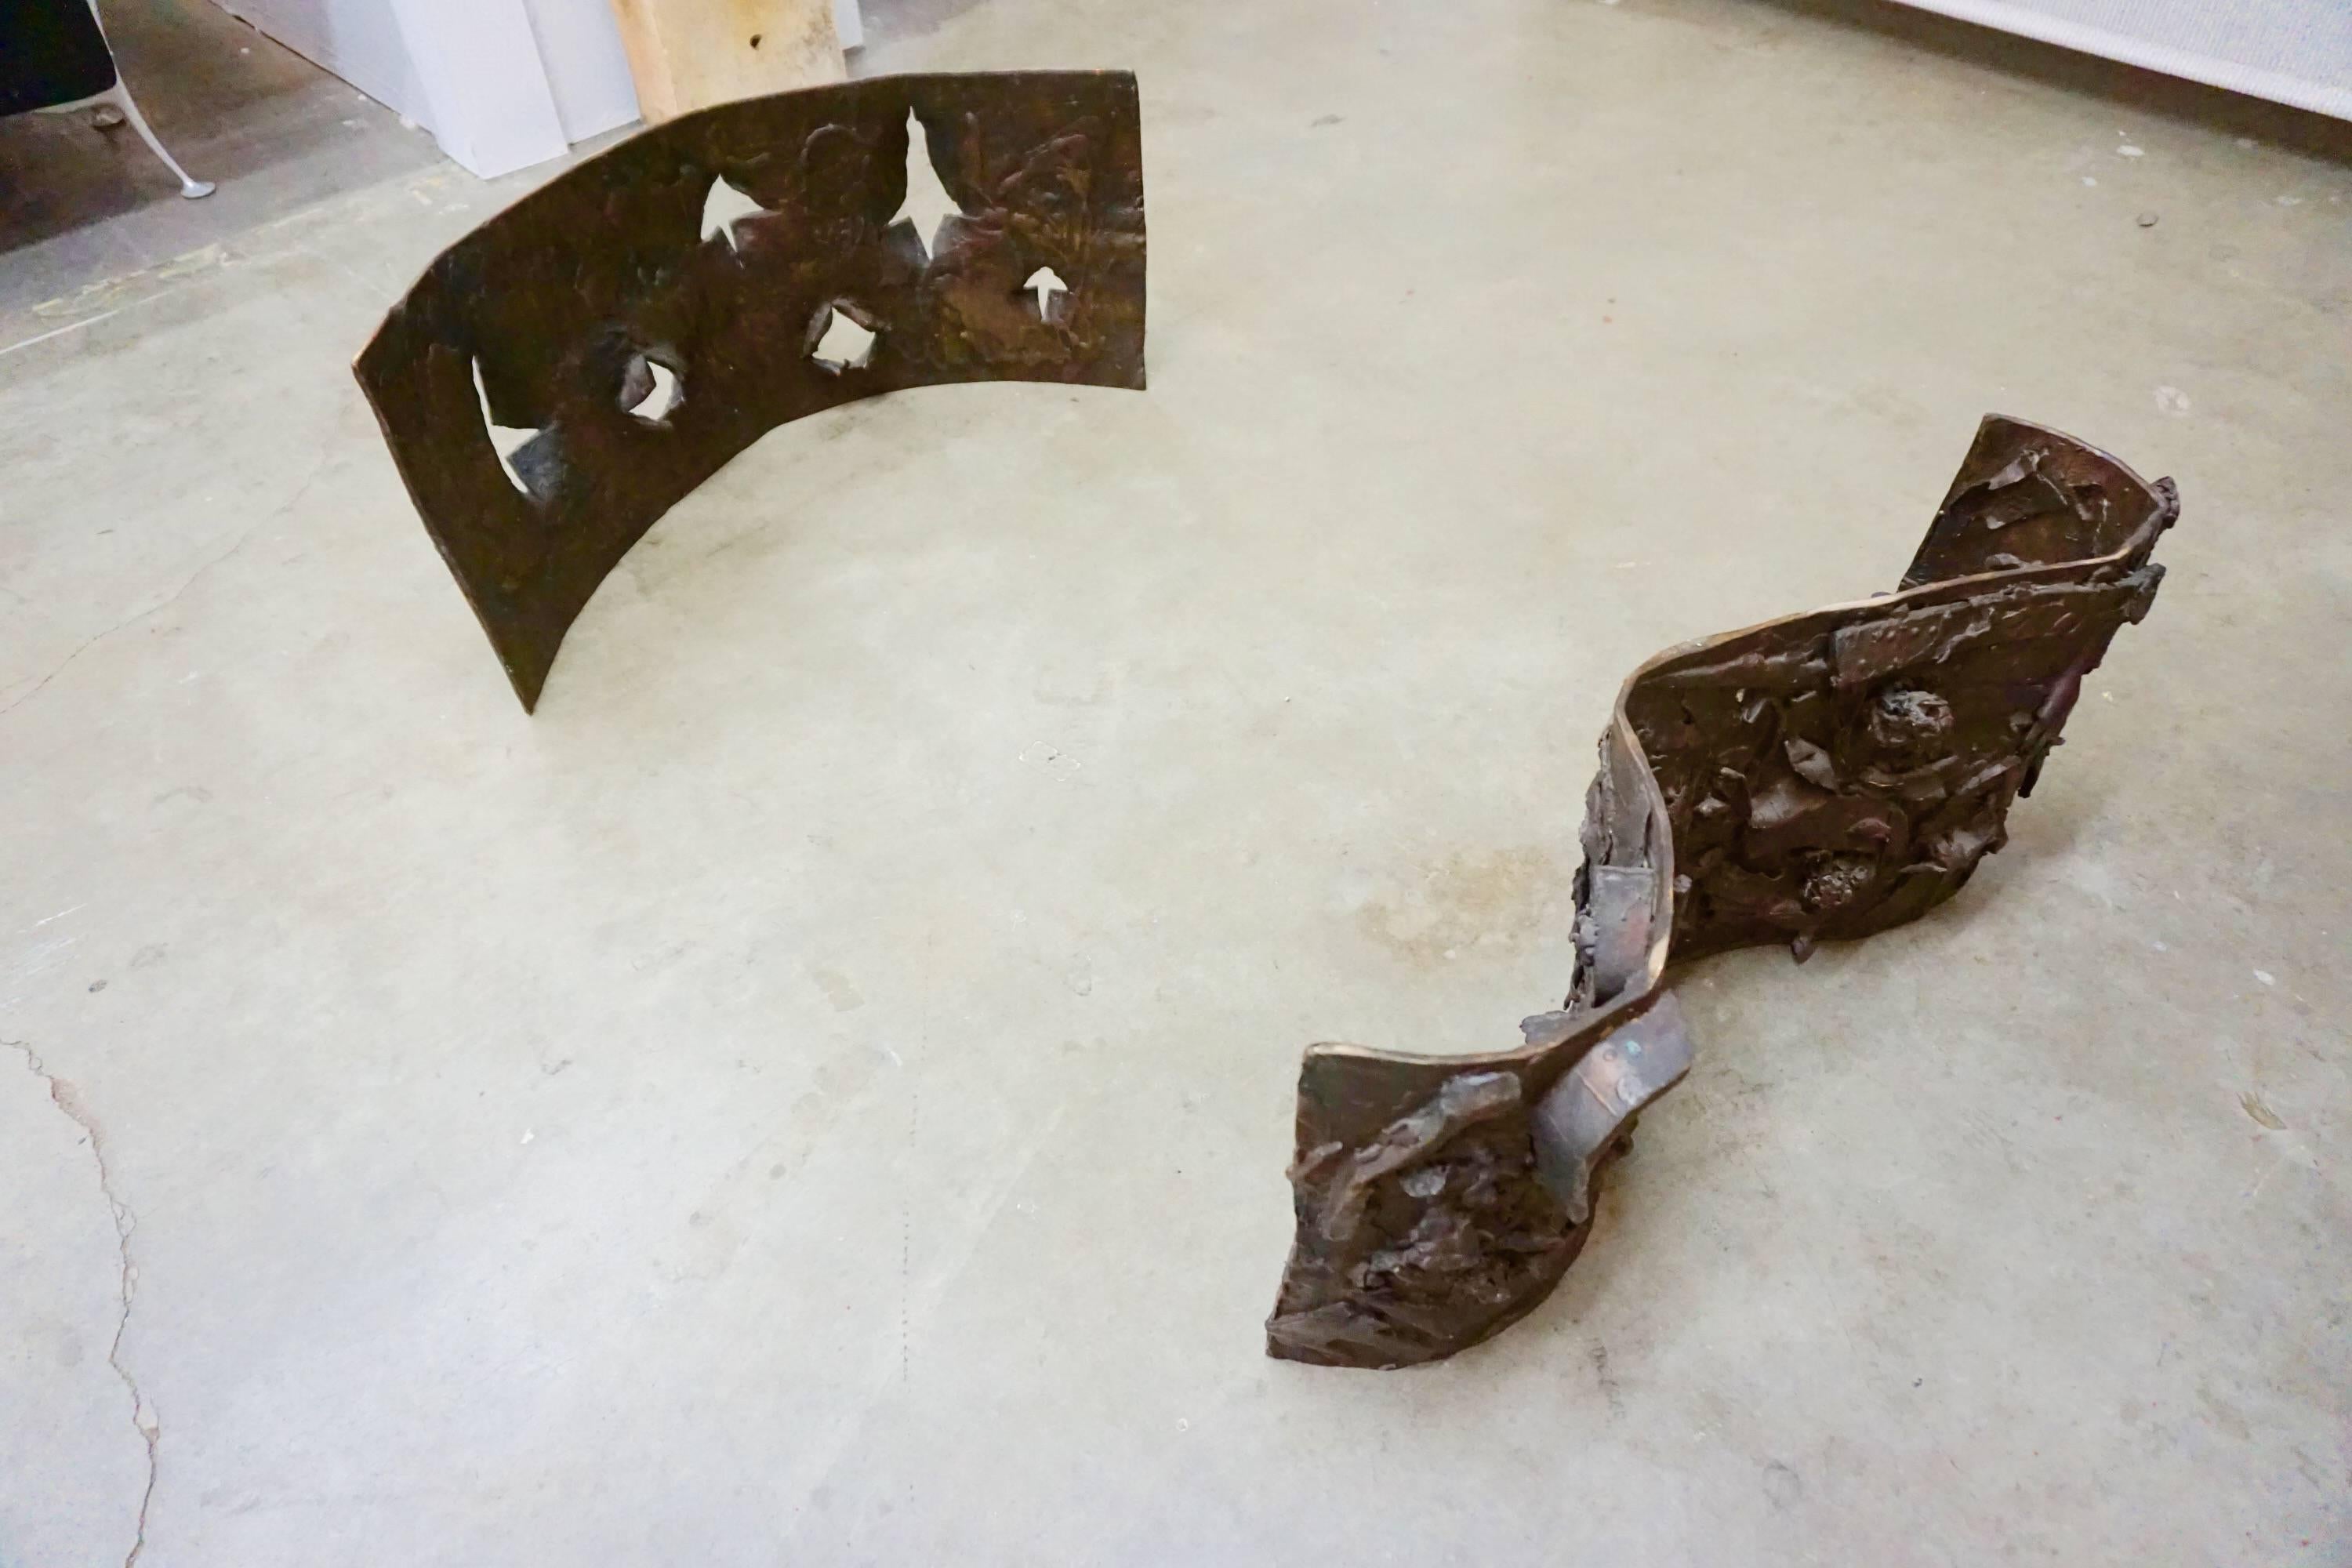 Two-piece, heavy, handcrafted bronze bases. Free-form sculpted and adjustable. Serious addition to your home decor.